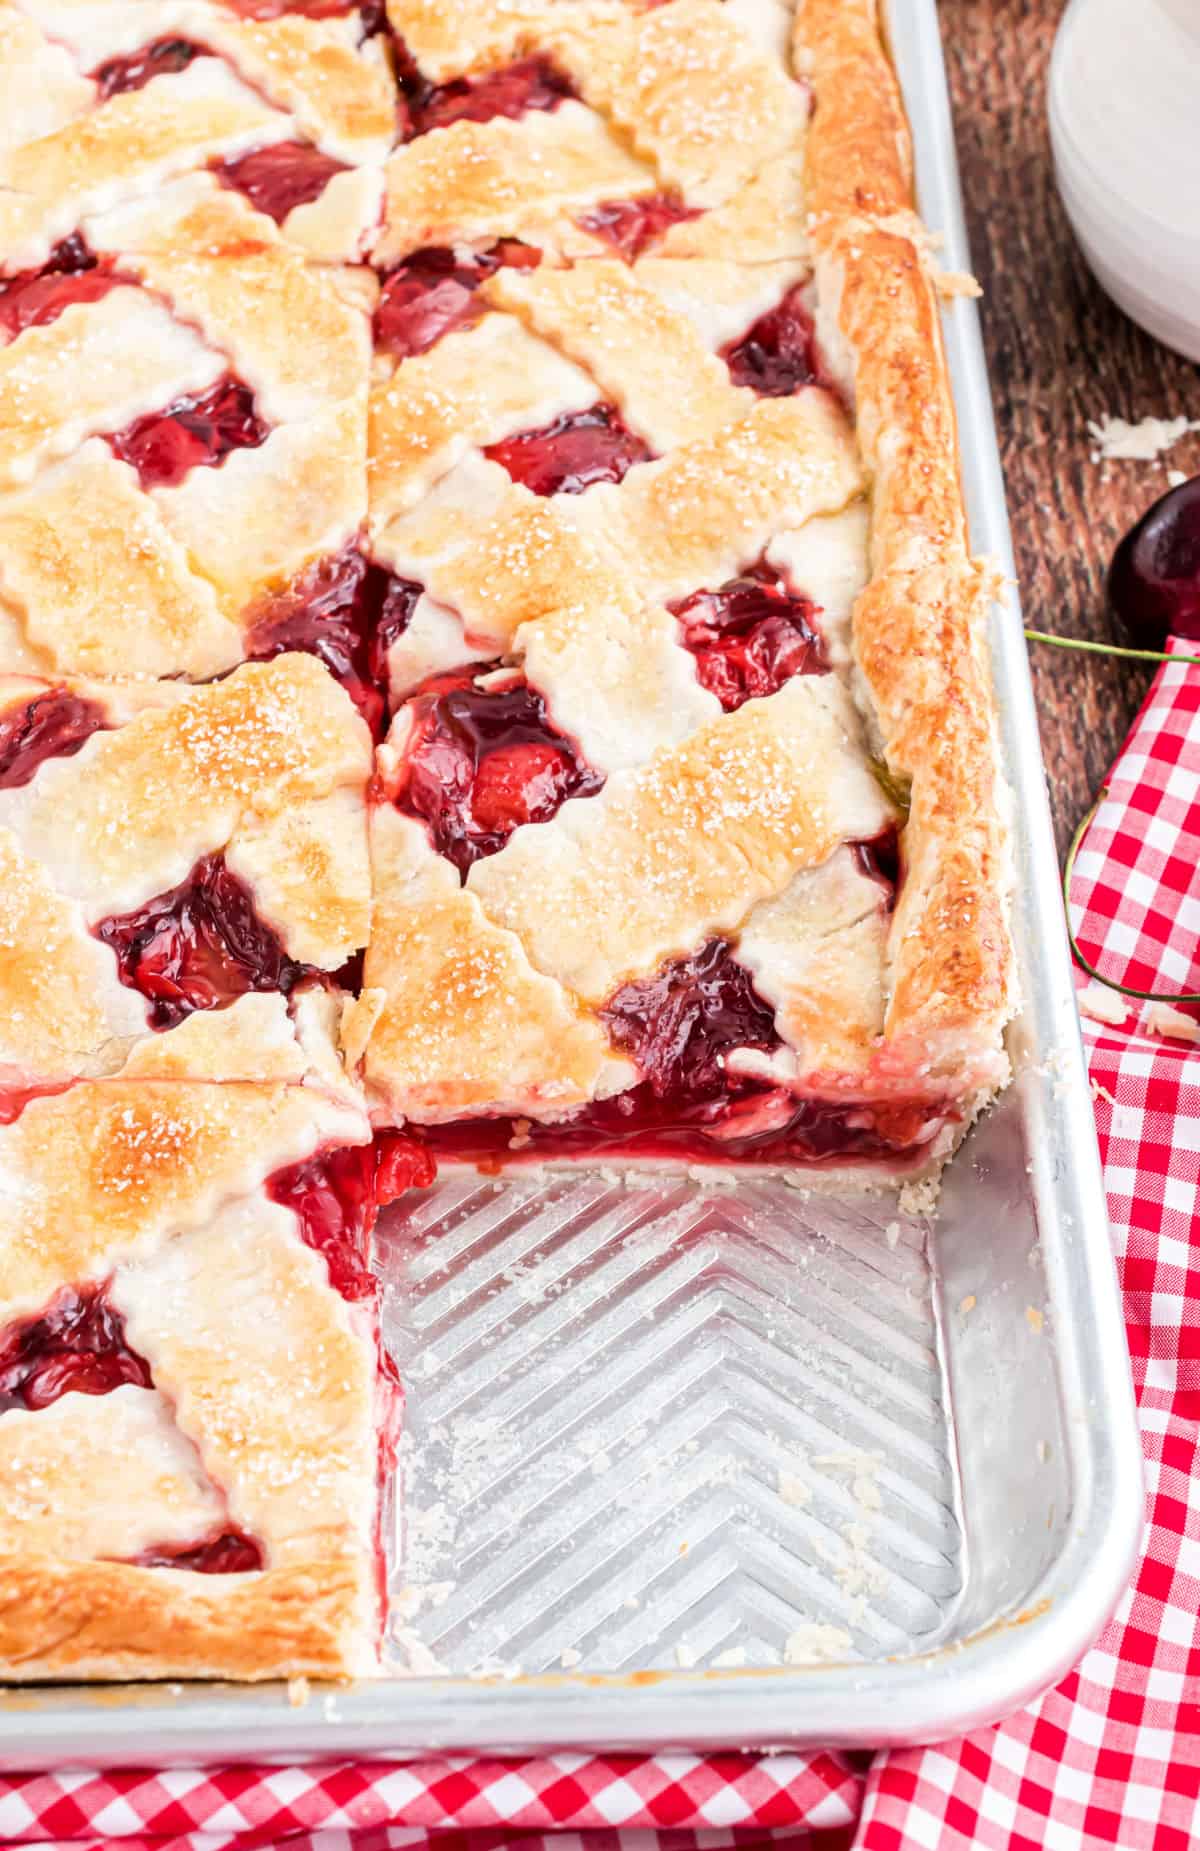 Cherry pie in a sheet pan with a lattice topping.